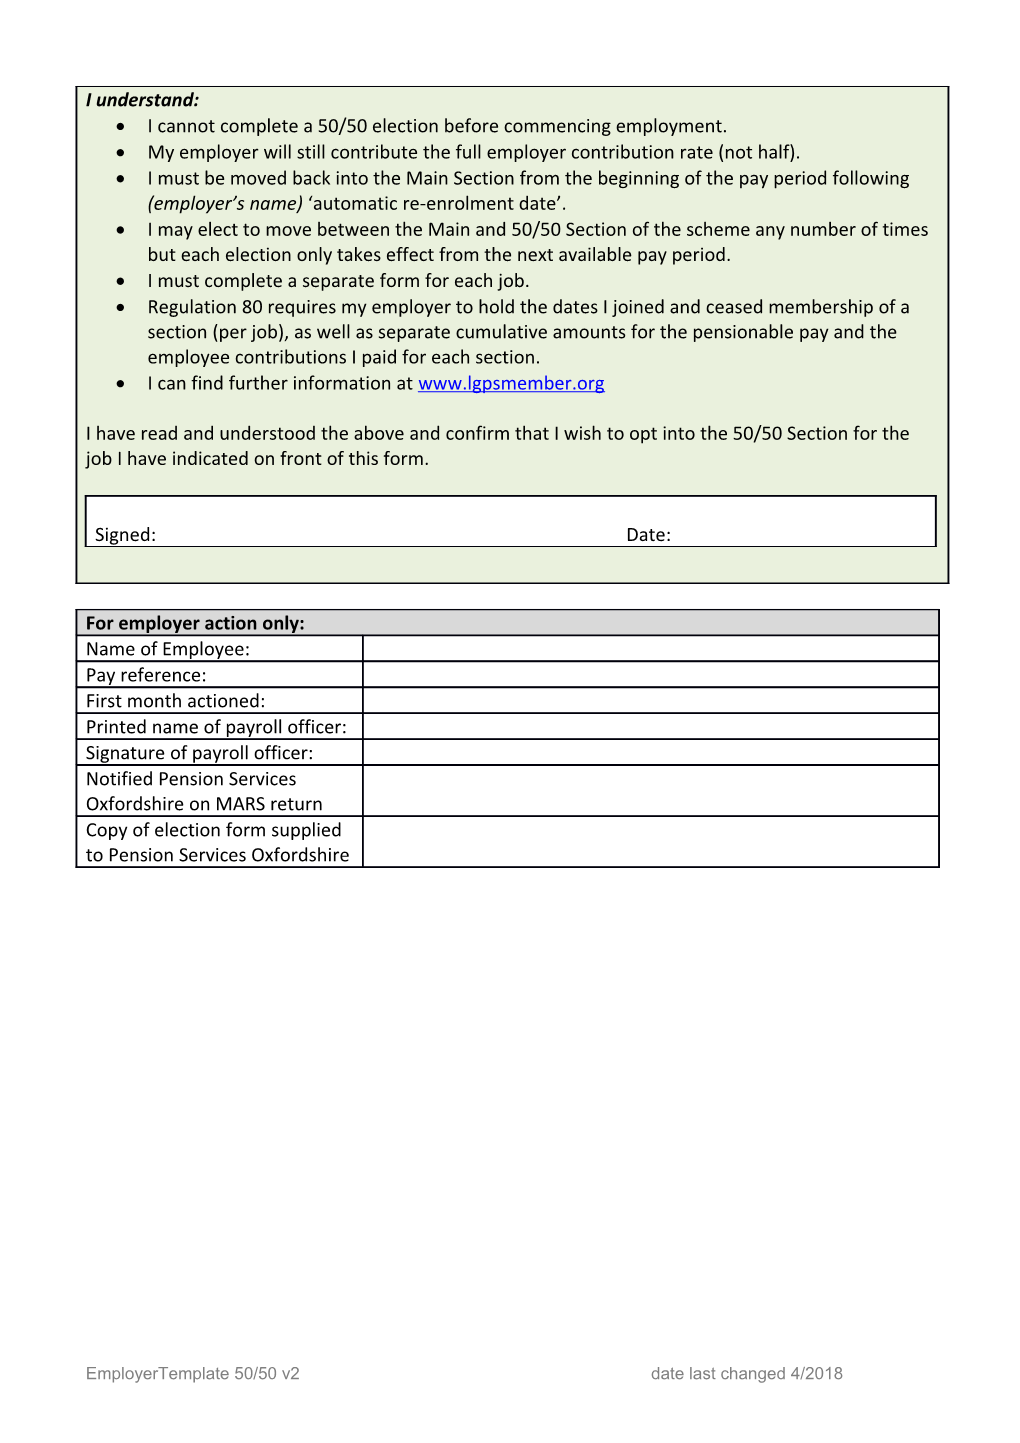 50/50 ELECTION FORM (Option to Pay Less) in the LGPS